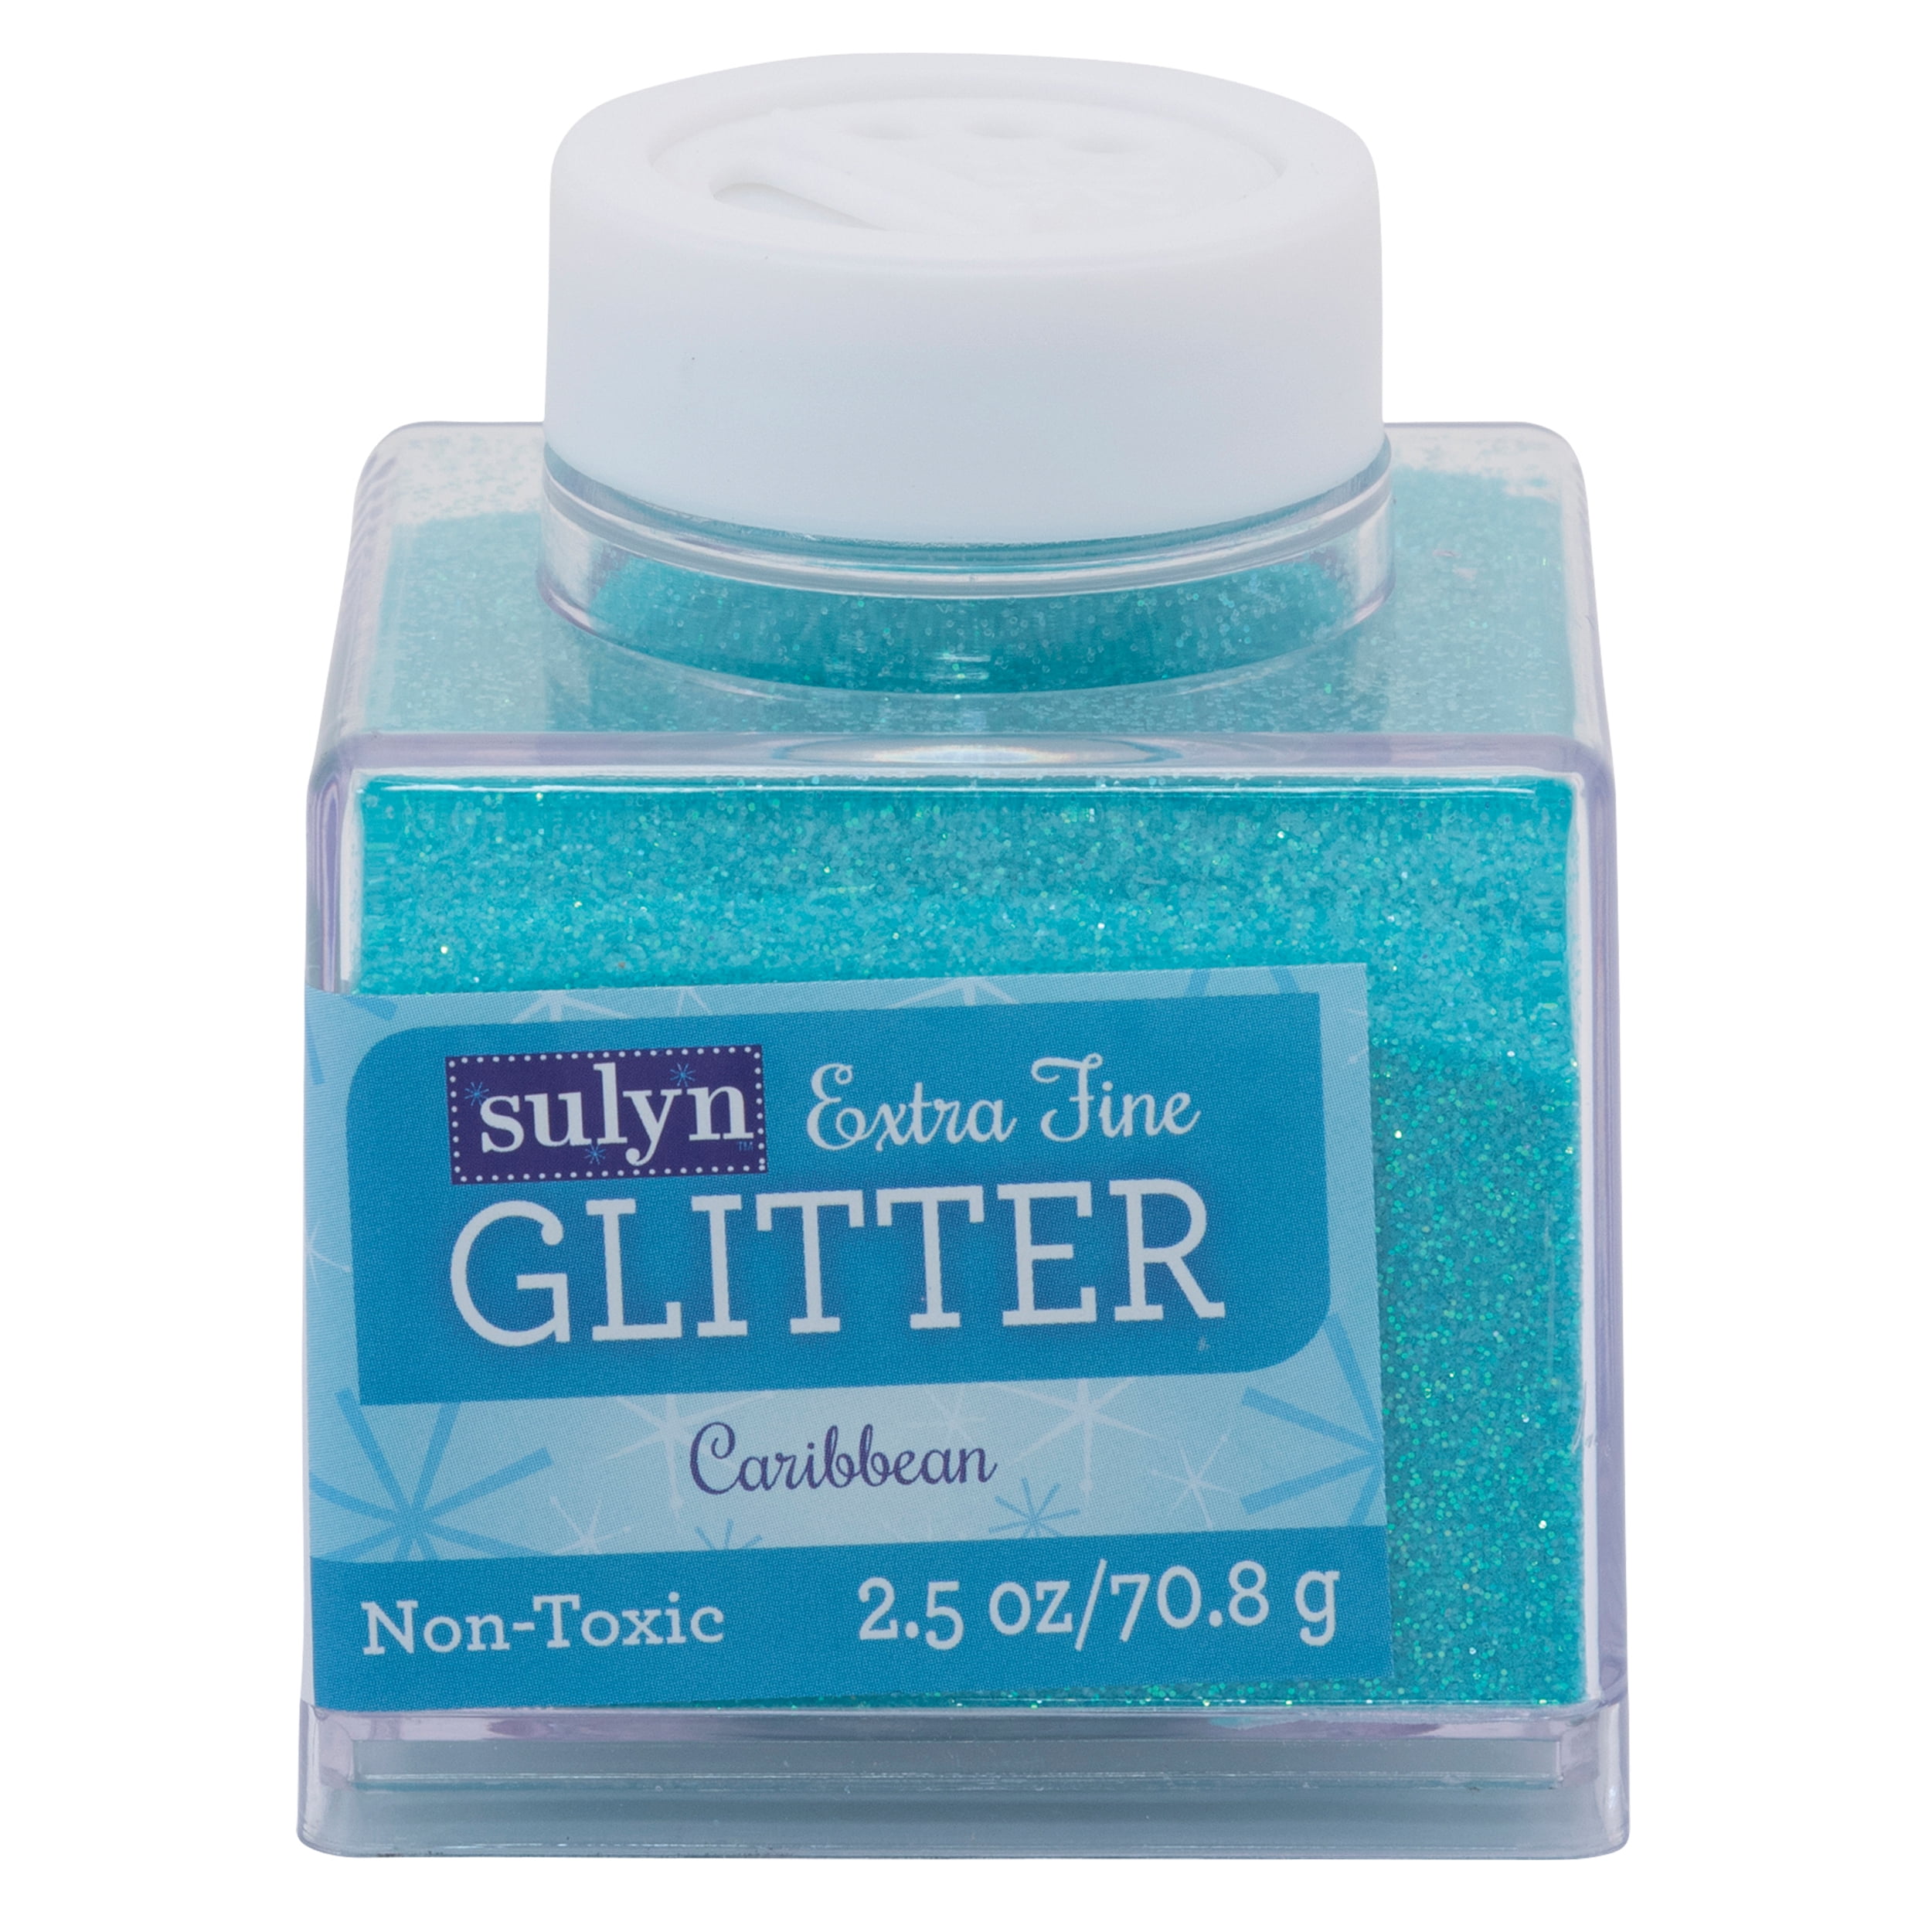 American Crafts Color Pour Resin Mix-Ins-Color Changing Glitter 4/Pkg 